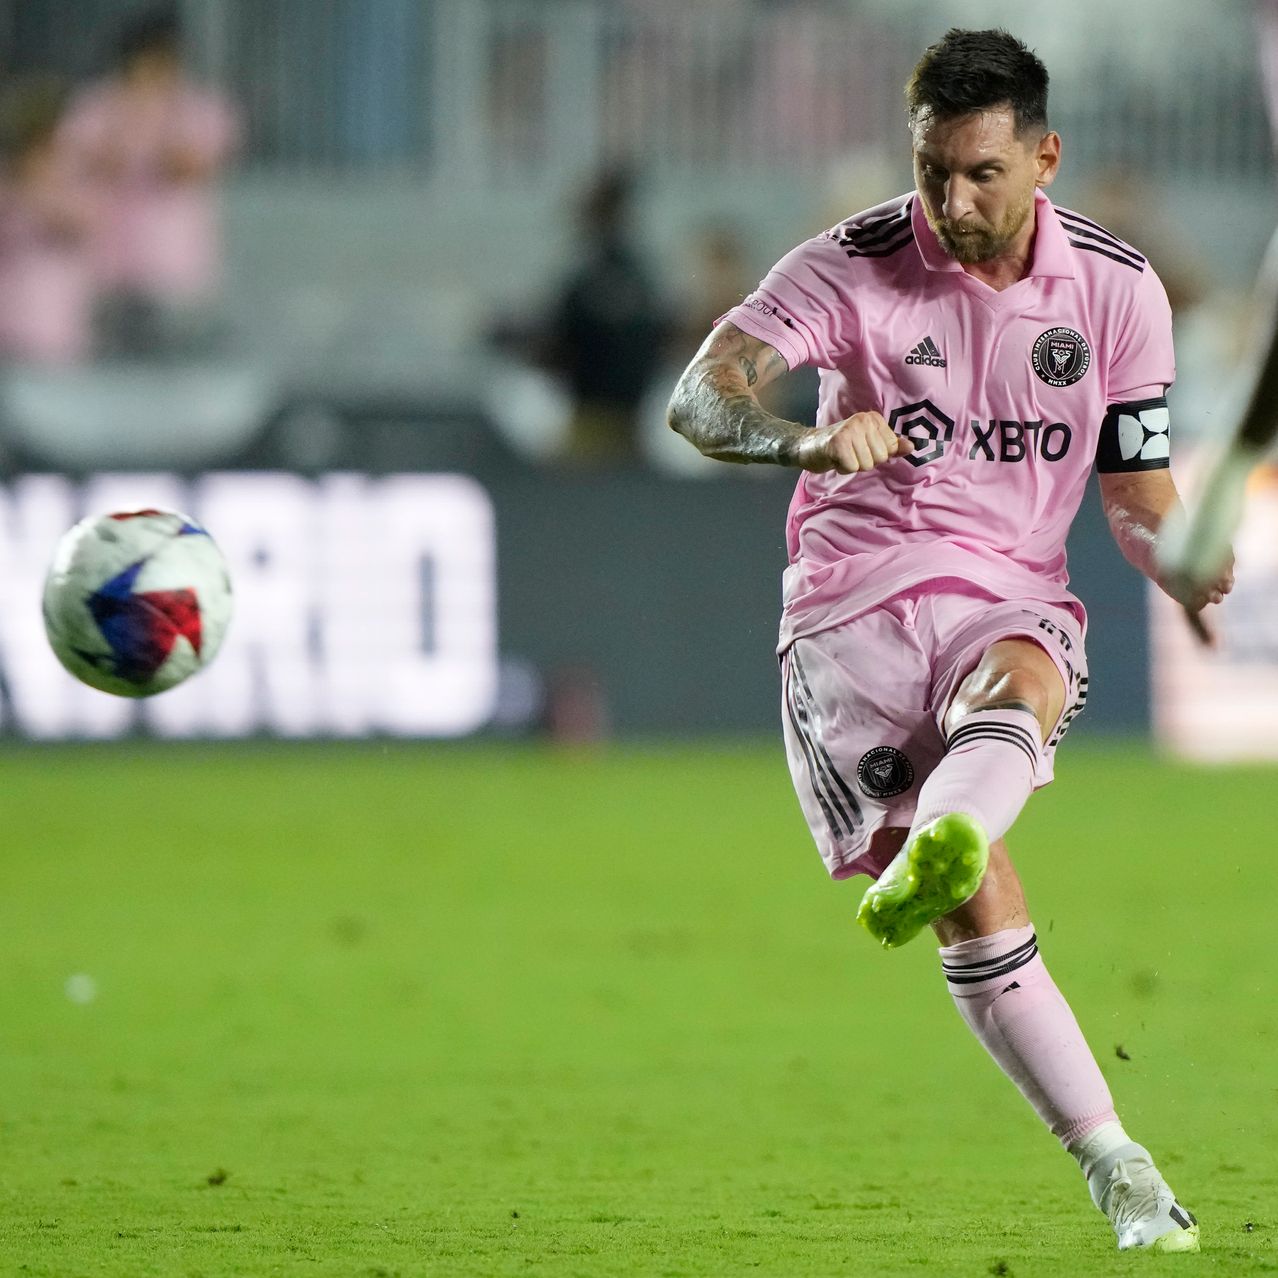 Lionel Messi Signs With Miami And Lights Up The Pitch With Two Goals.